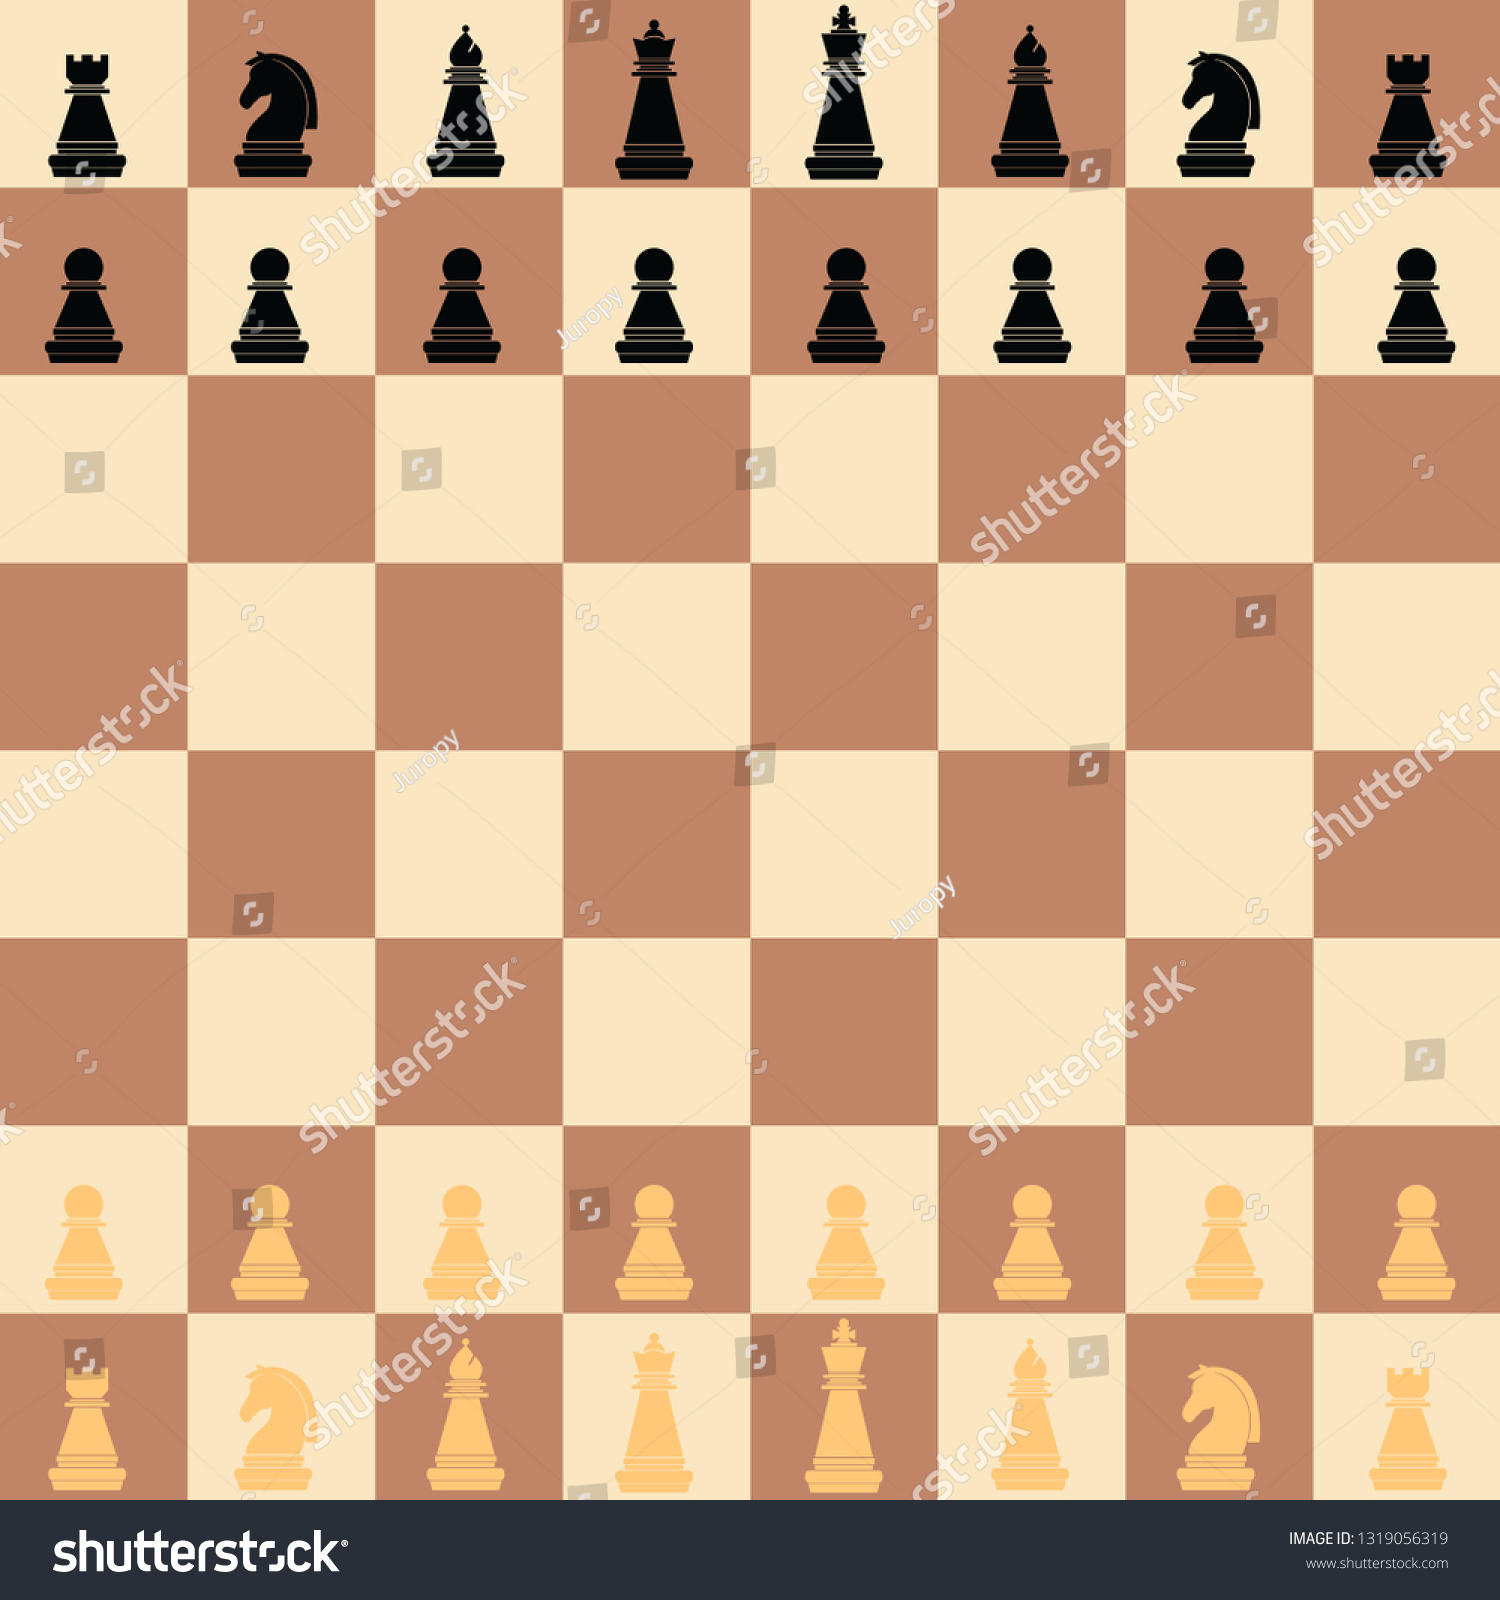 SVG of Chess board illustration with all 16 pieces per side svg